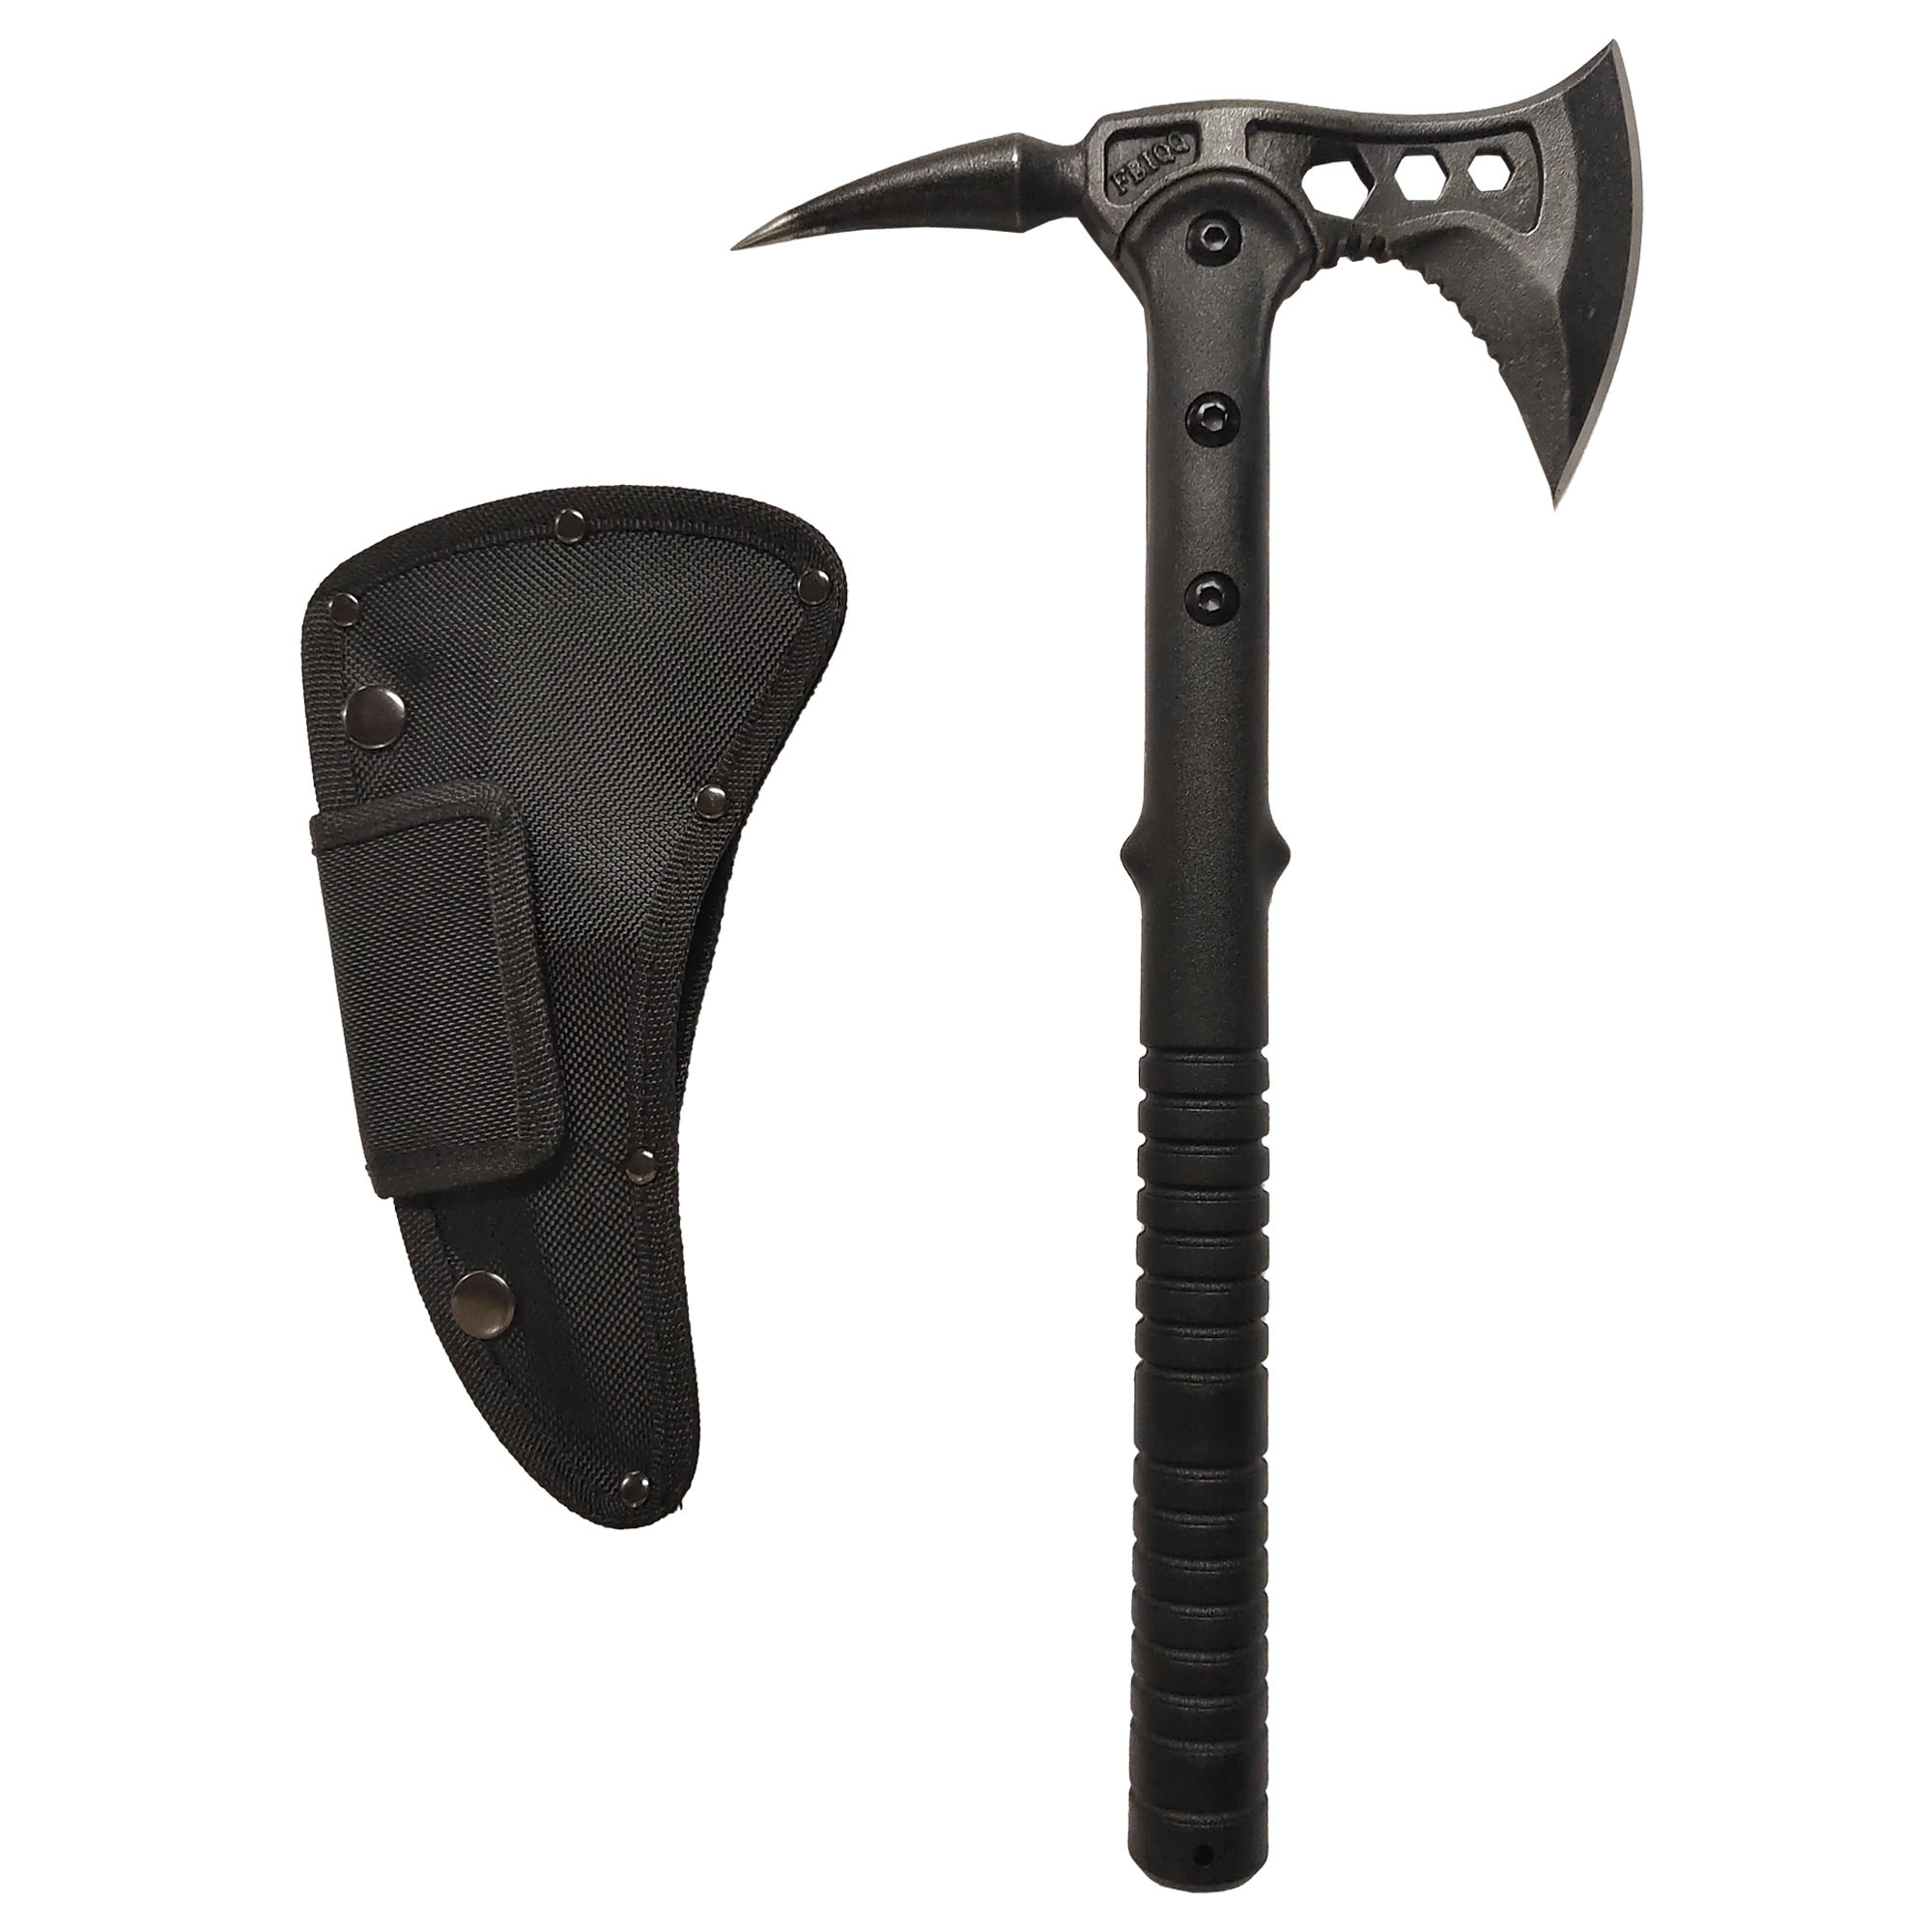 Survival axe with spiked head and sheath